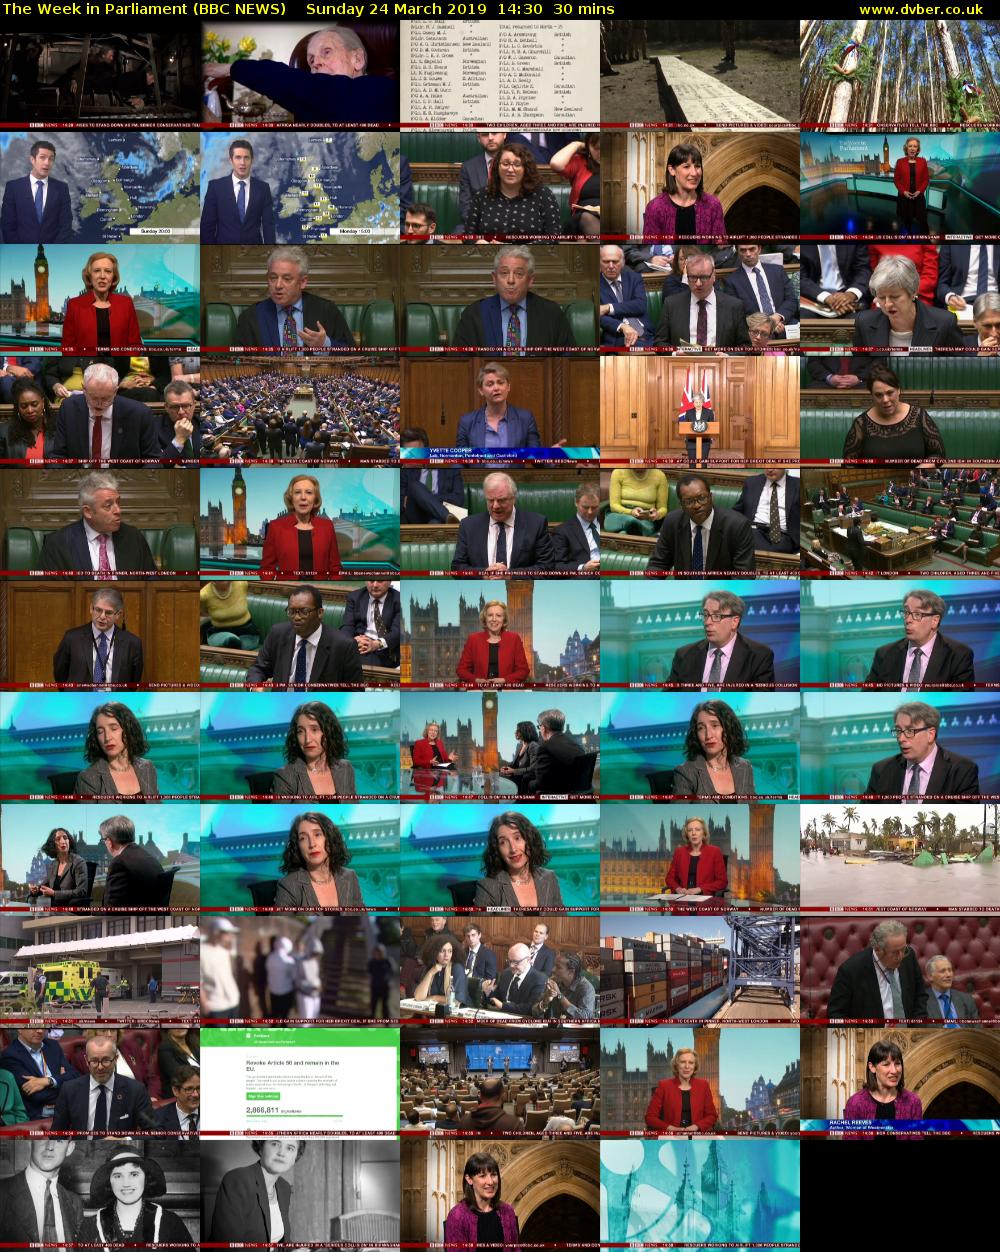 The Week in Parliament (BBC NEWS) Sunday 24 March 2019 14:30 - 15:00